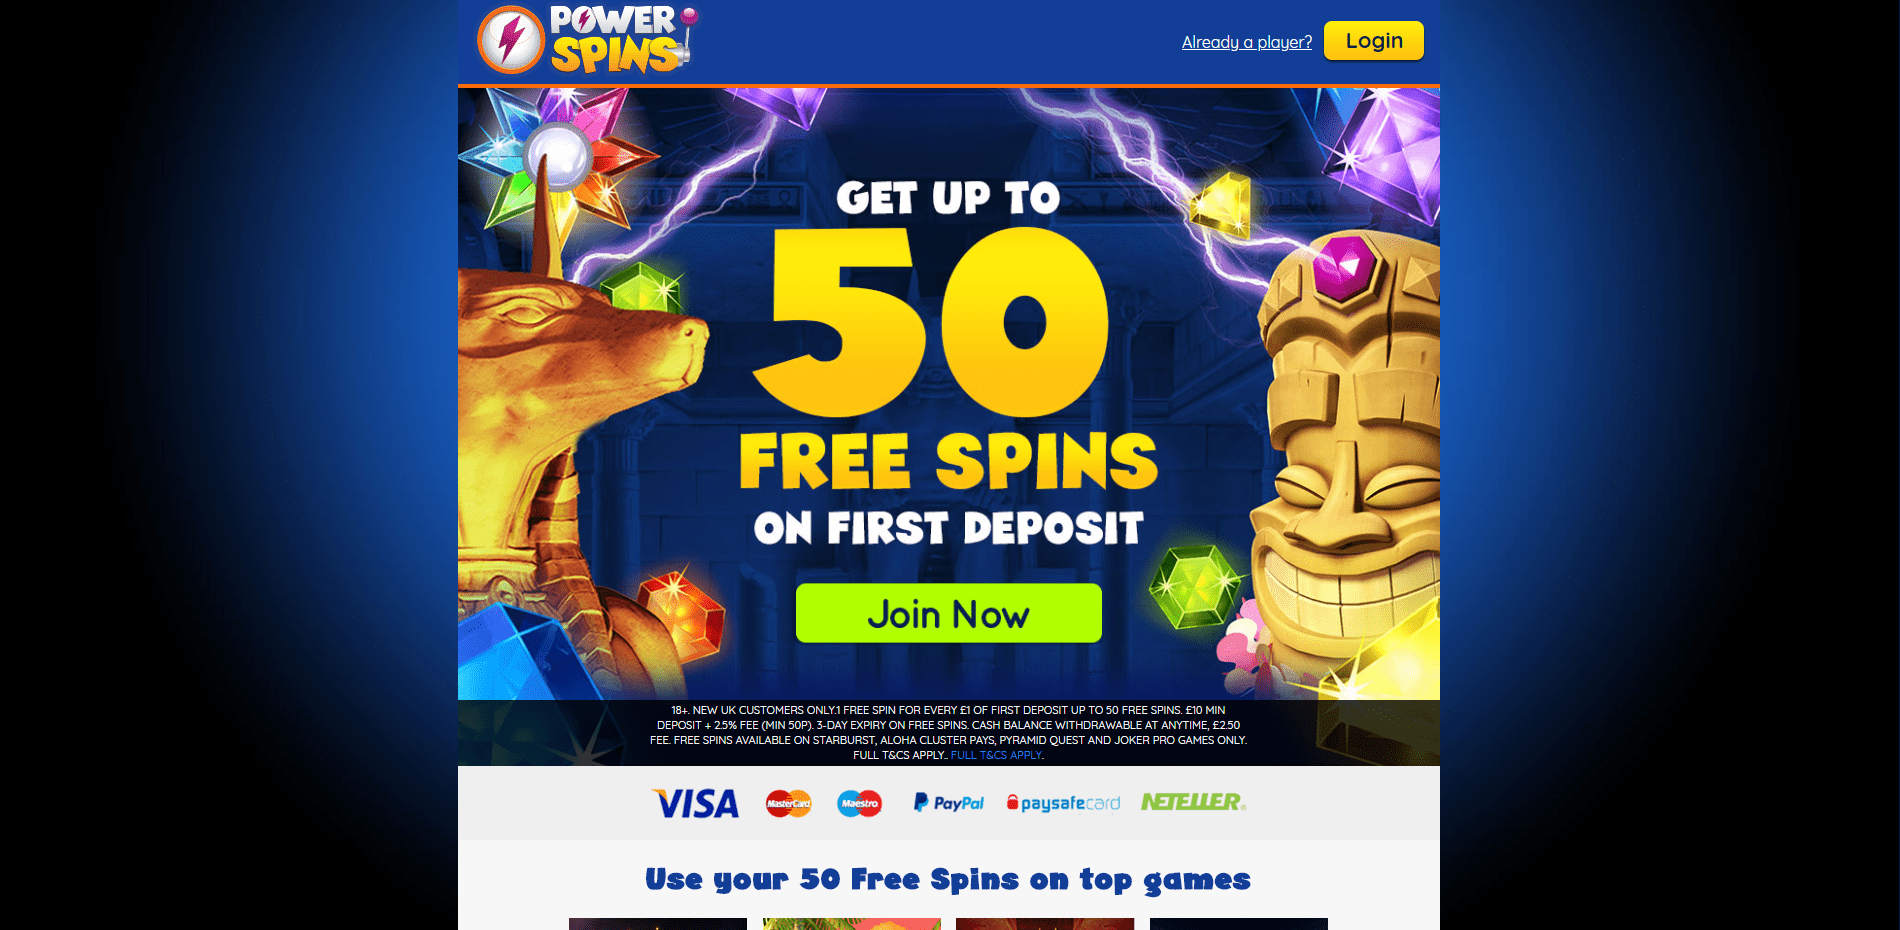 Power Spins Review